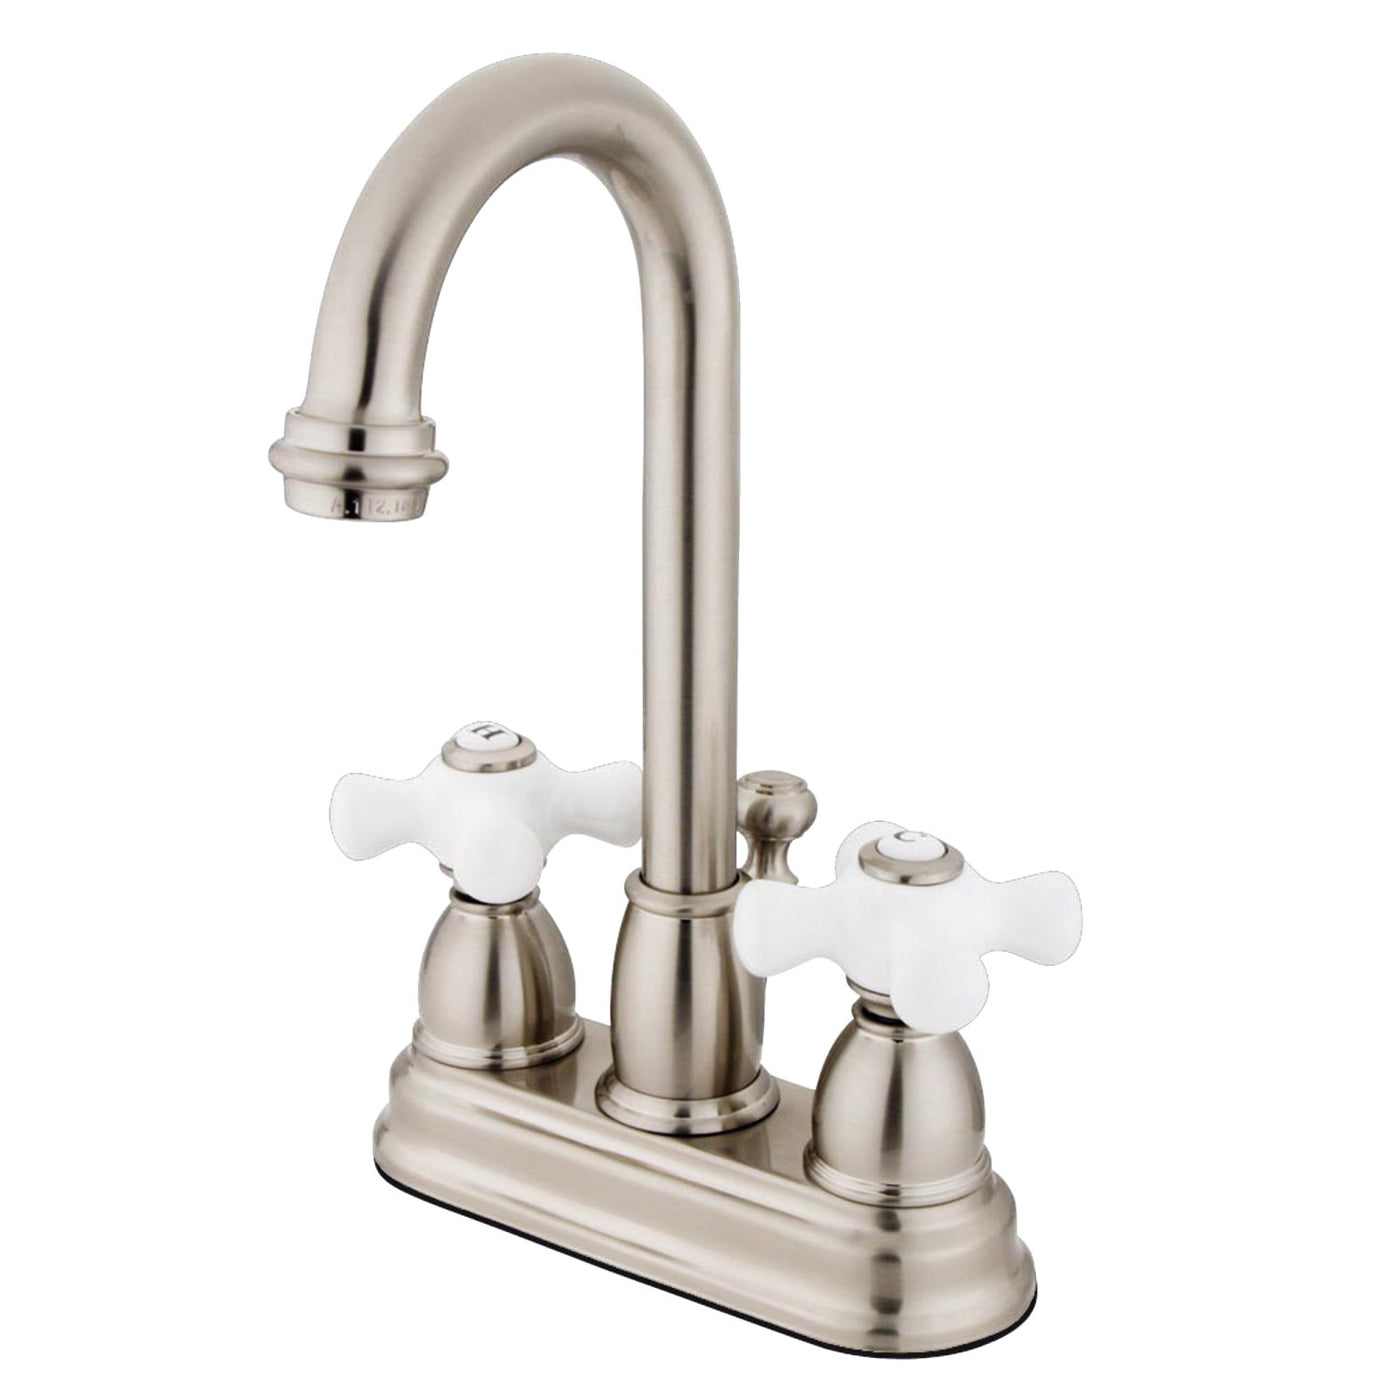 Elements of Design EB3618PX 4-Inch Centerset Bathroom Faucet, Brushed Nickel